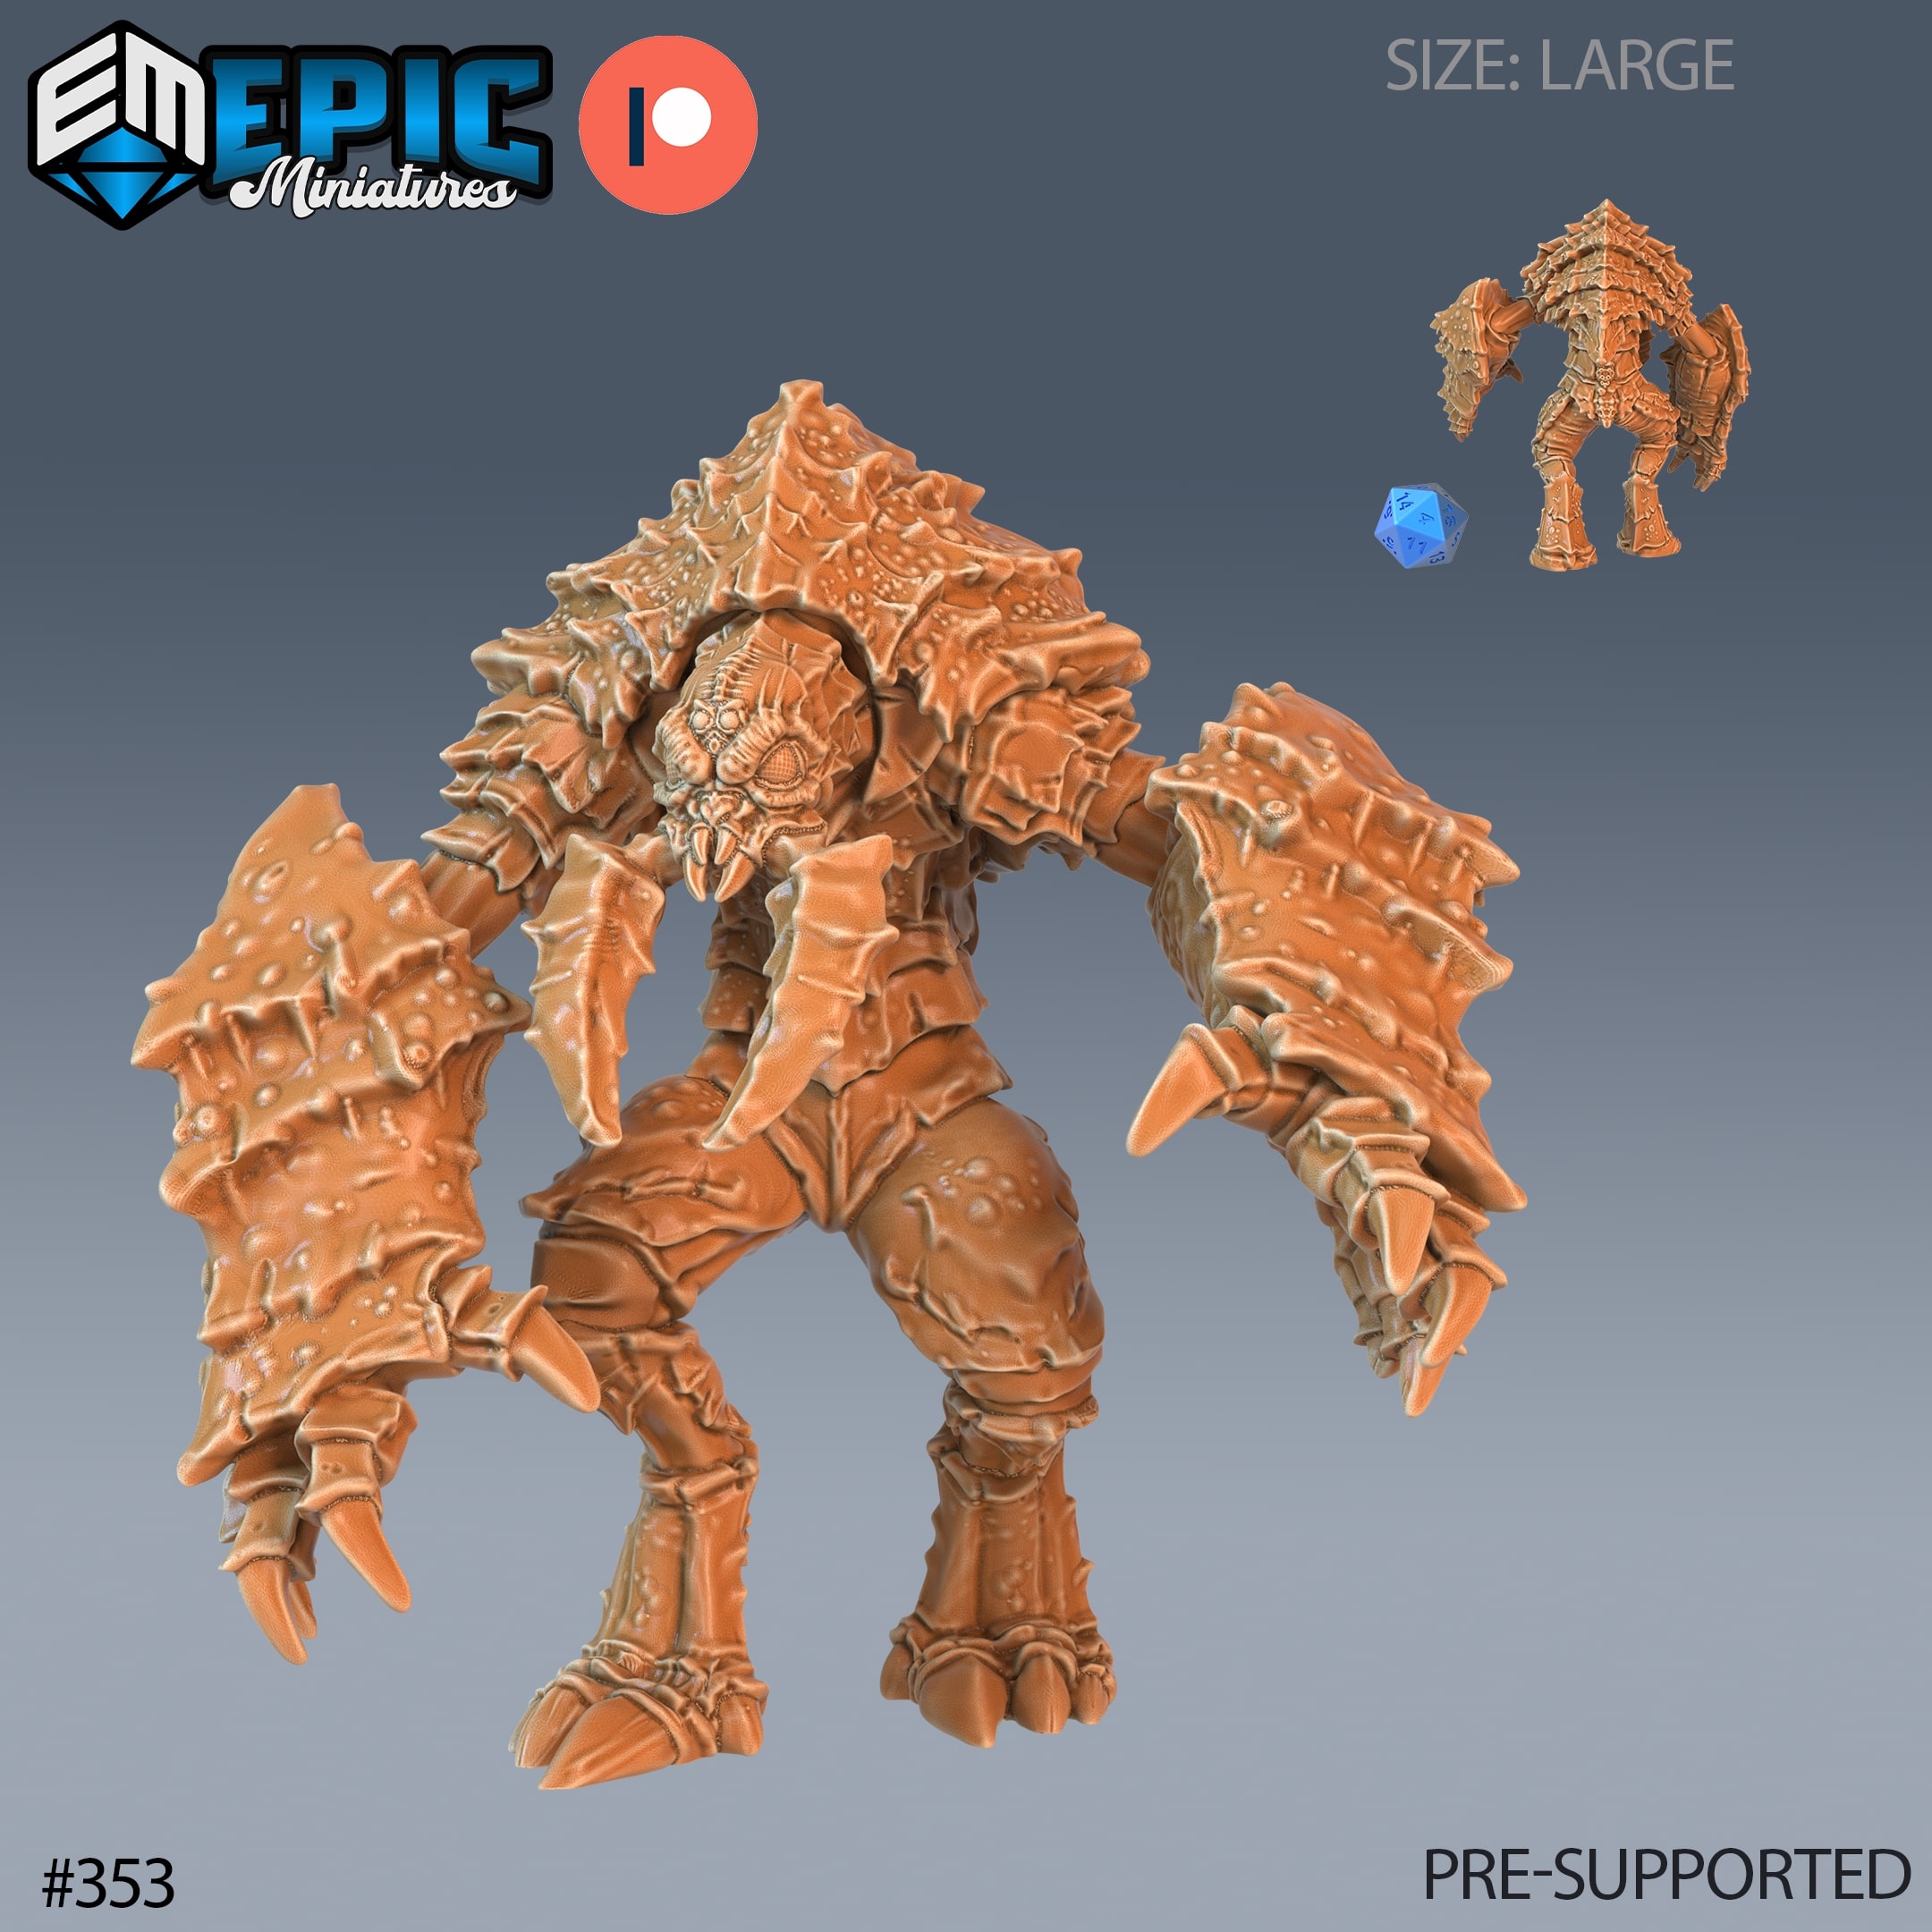 Monstrous Creature in DND Designed by Epic Miniatures